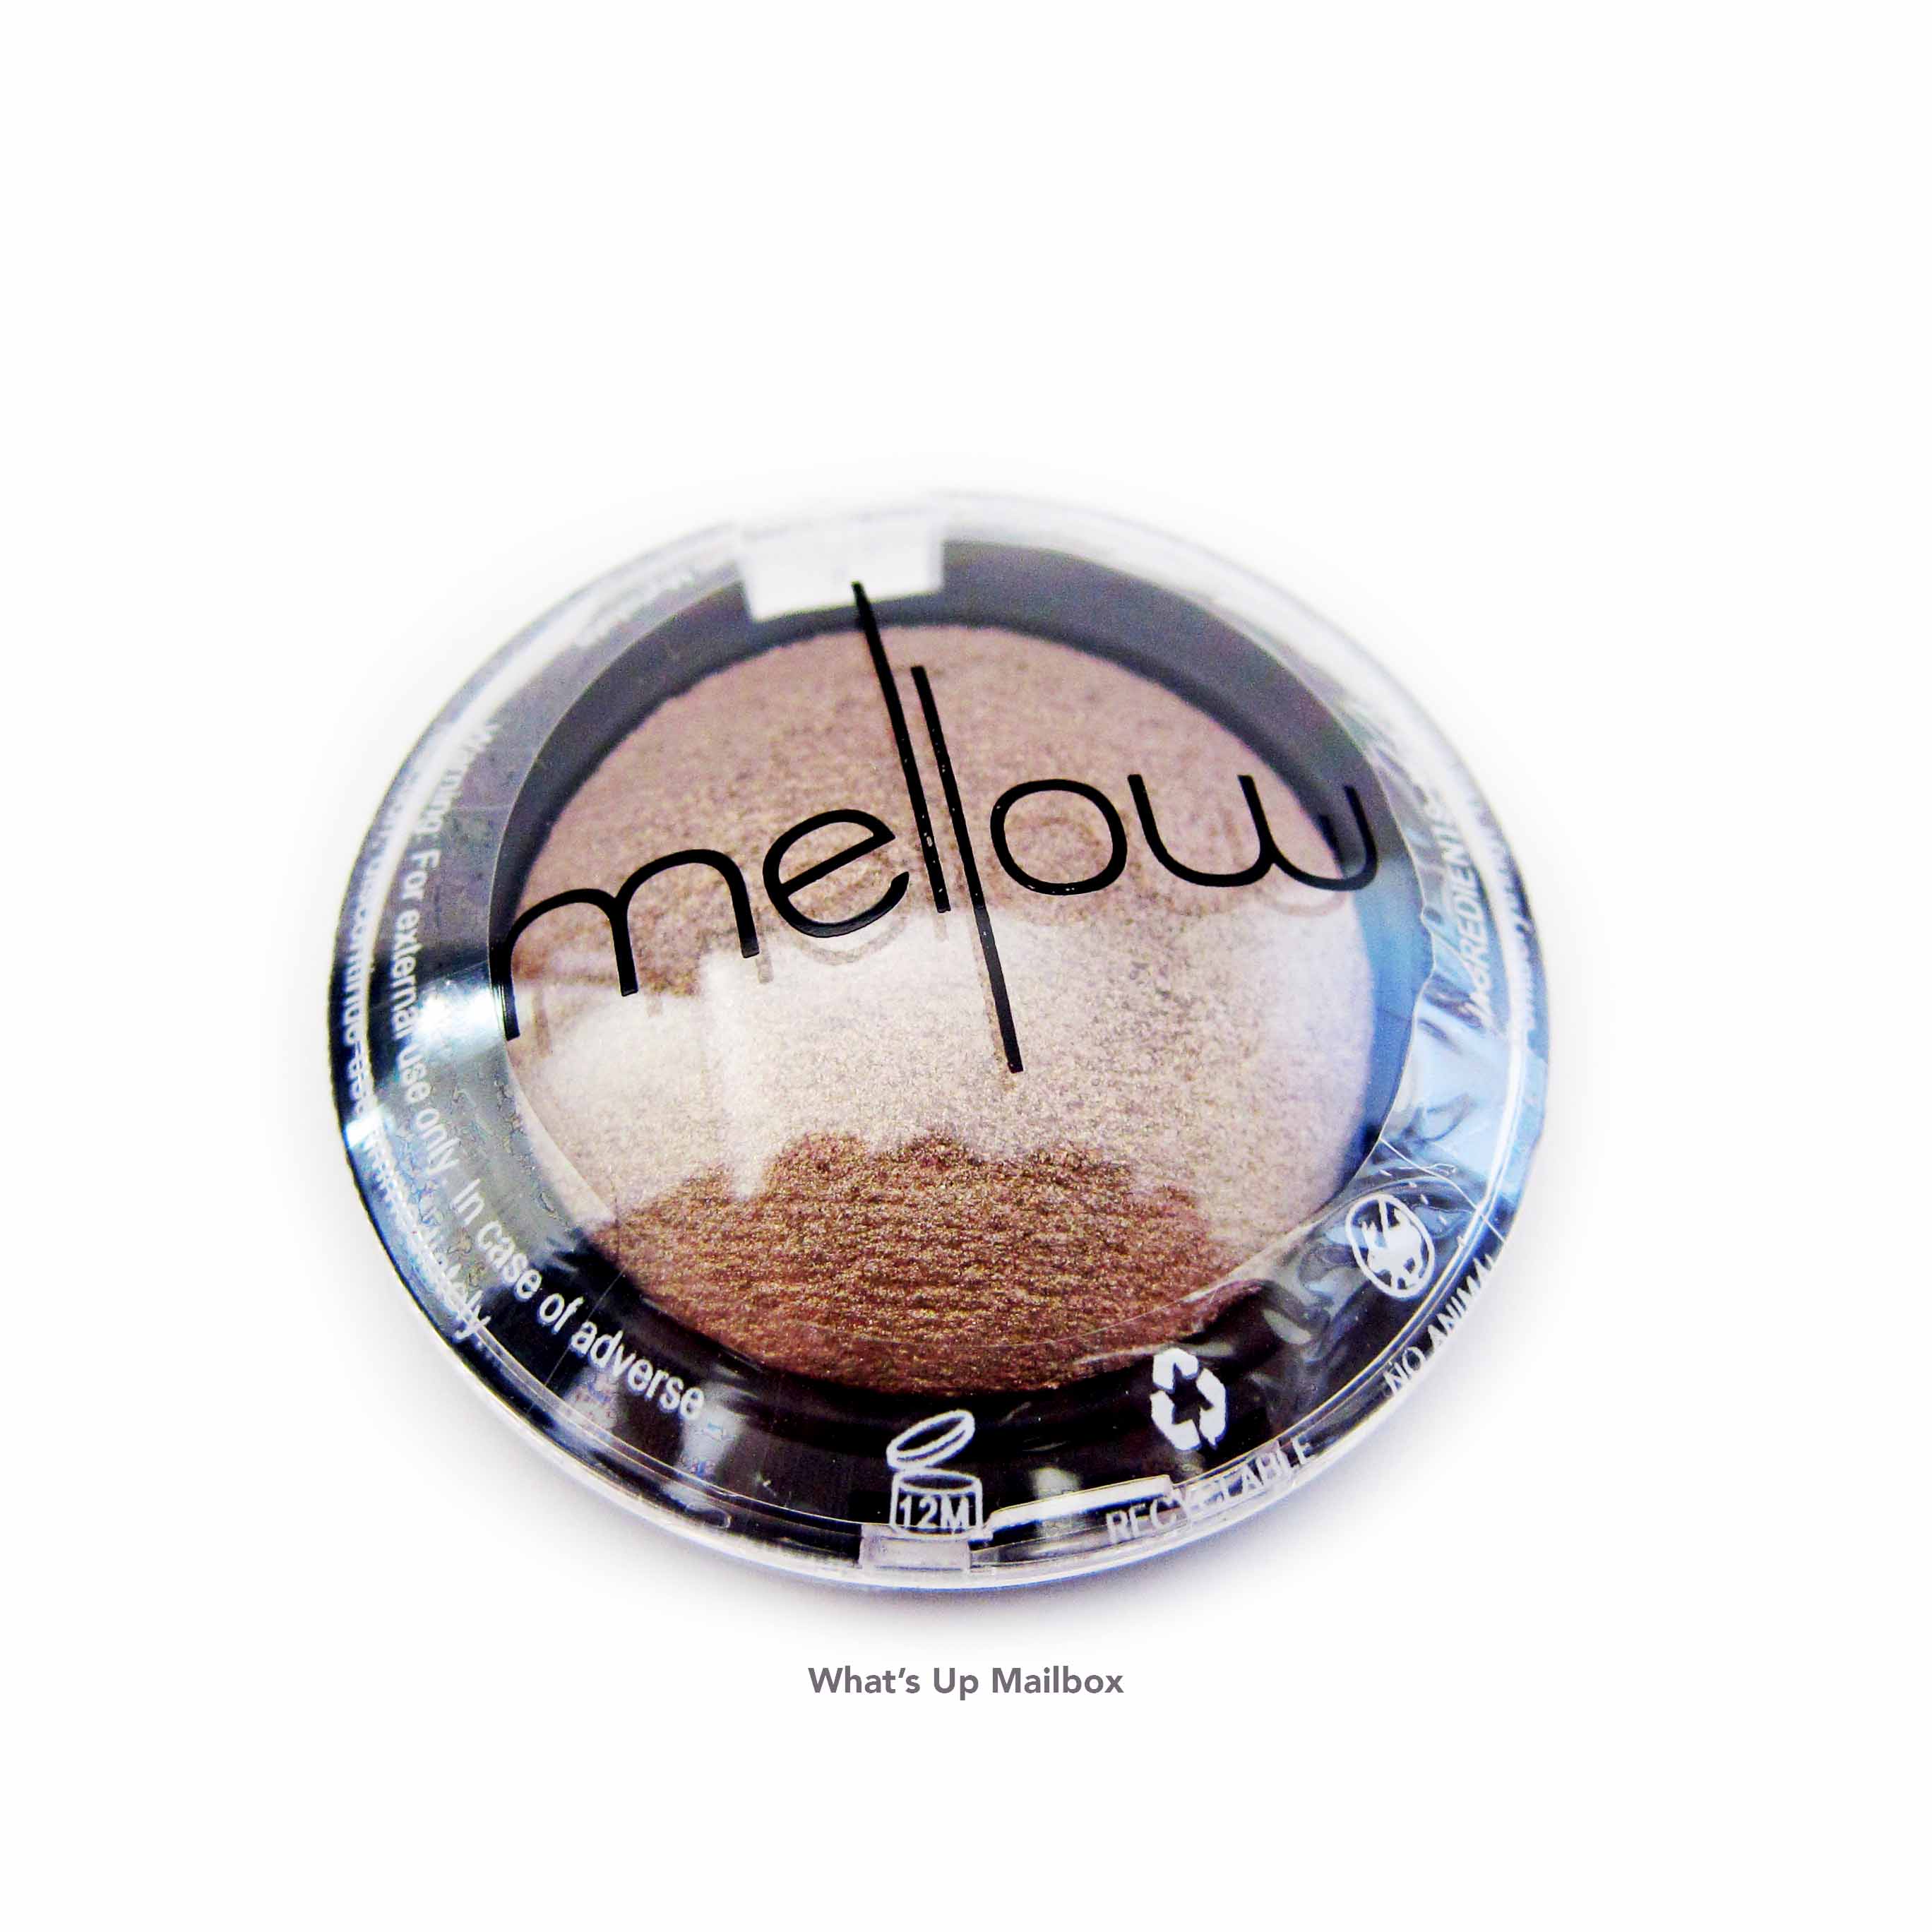 Mellow Cosmetics Baked Eyeshadow in Coco